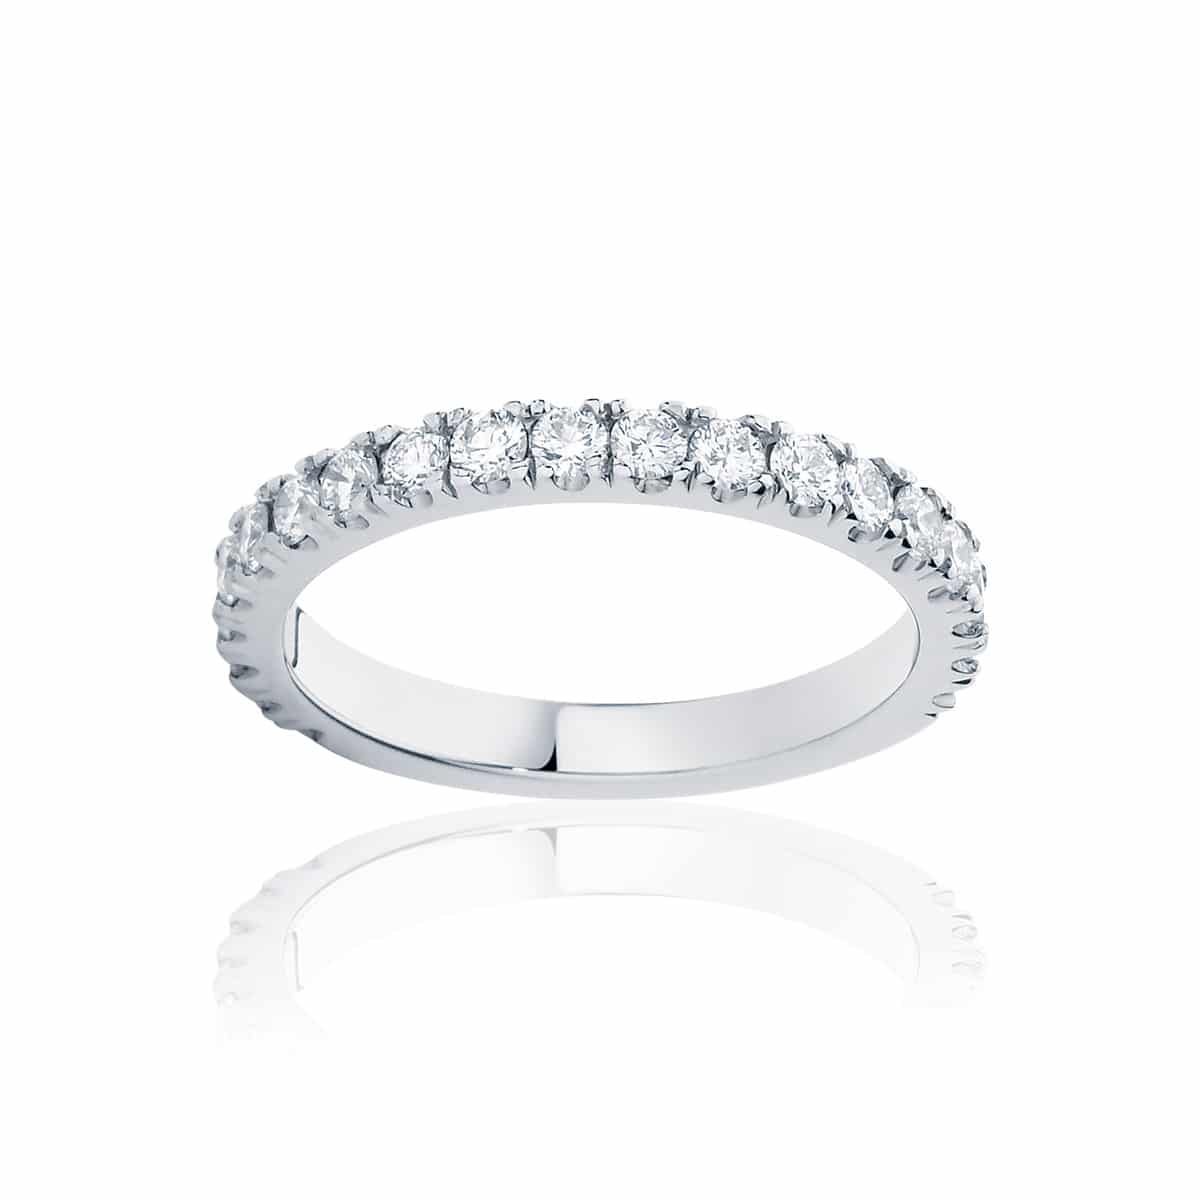 Stainless Steel 1.39 Ct Round Cut AAA Cz Wedding Band Ring Set Women's Size  5-10 - MarimorJewelry.com